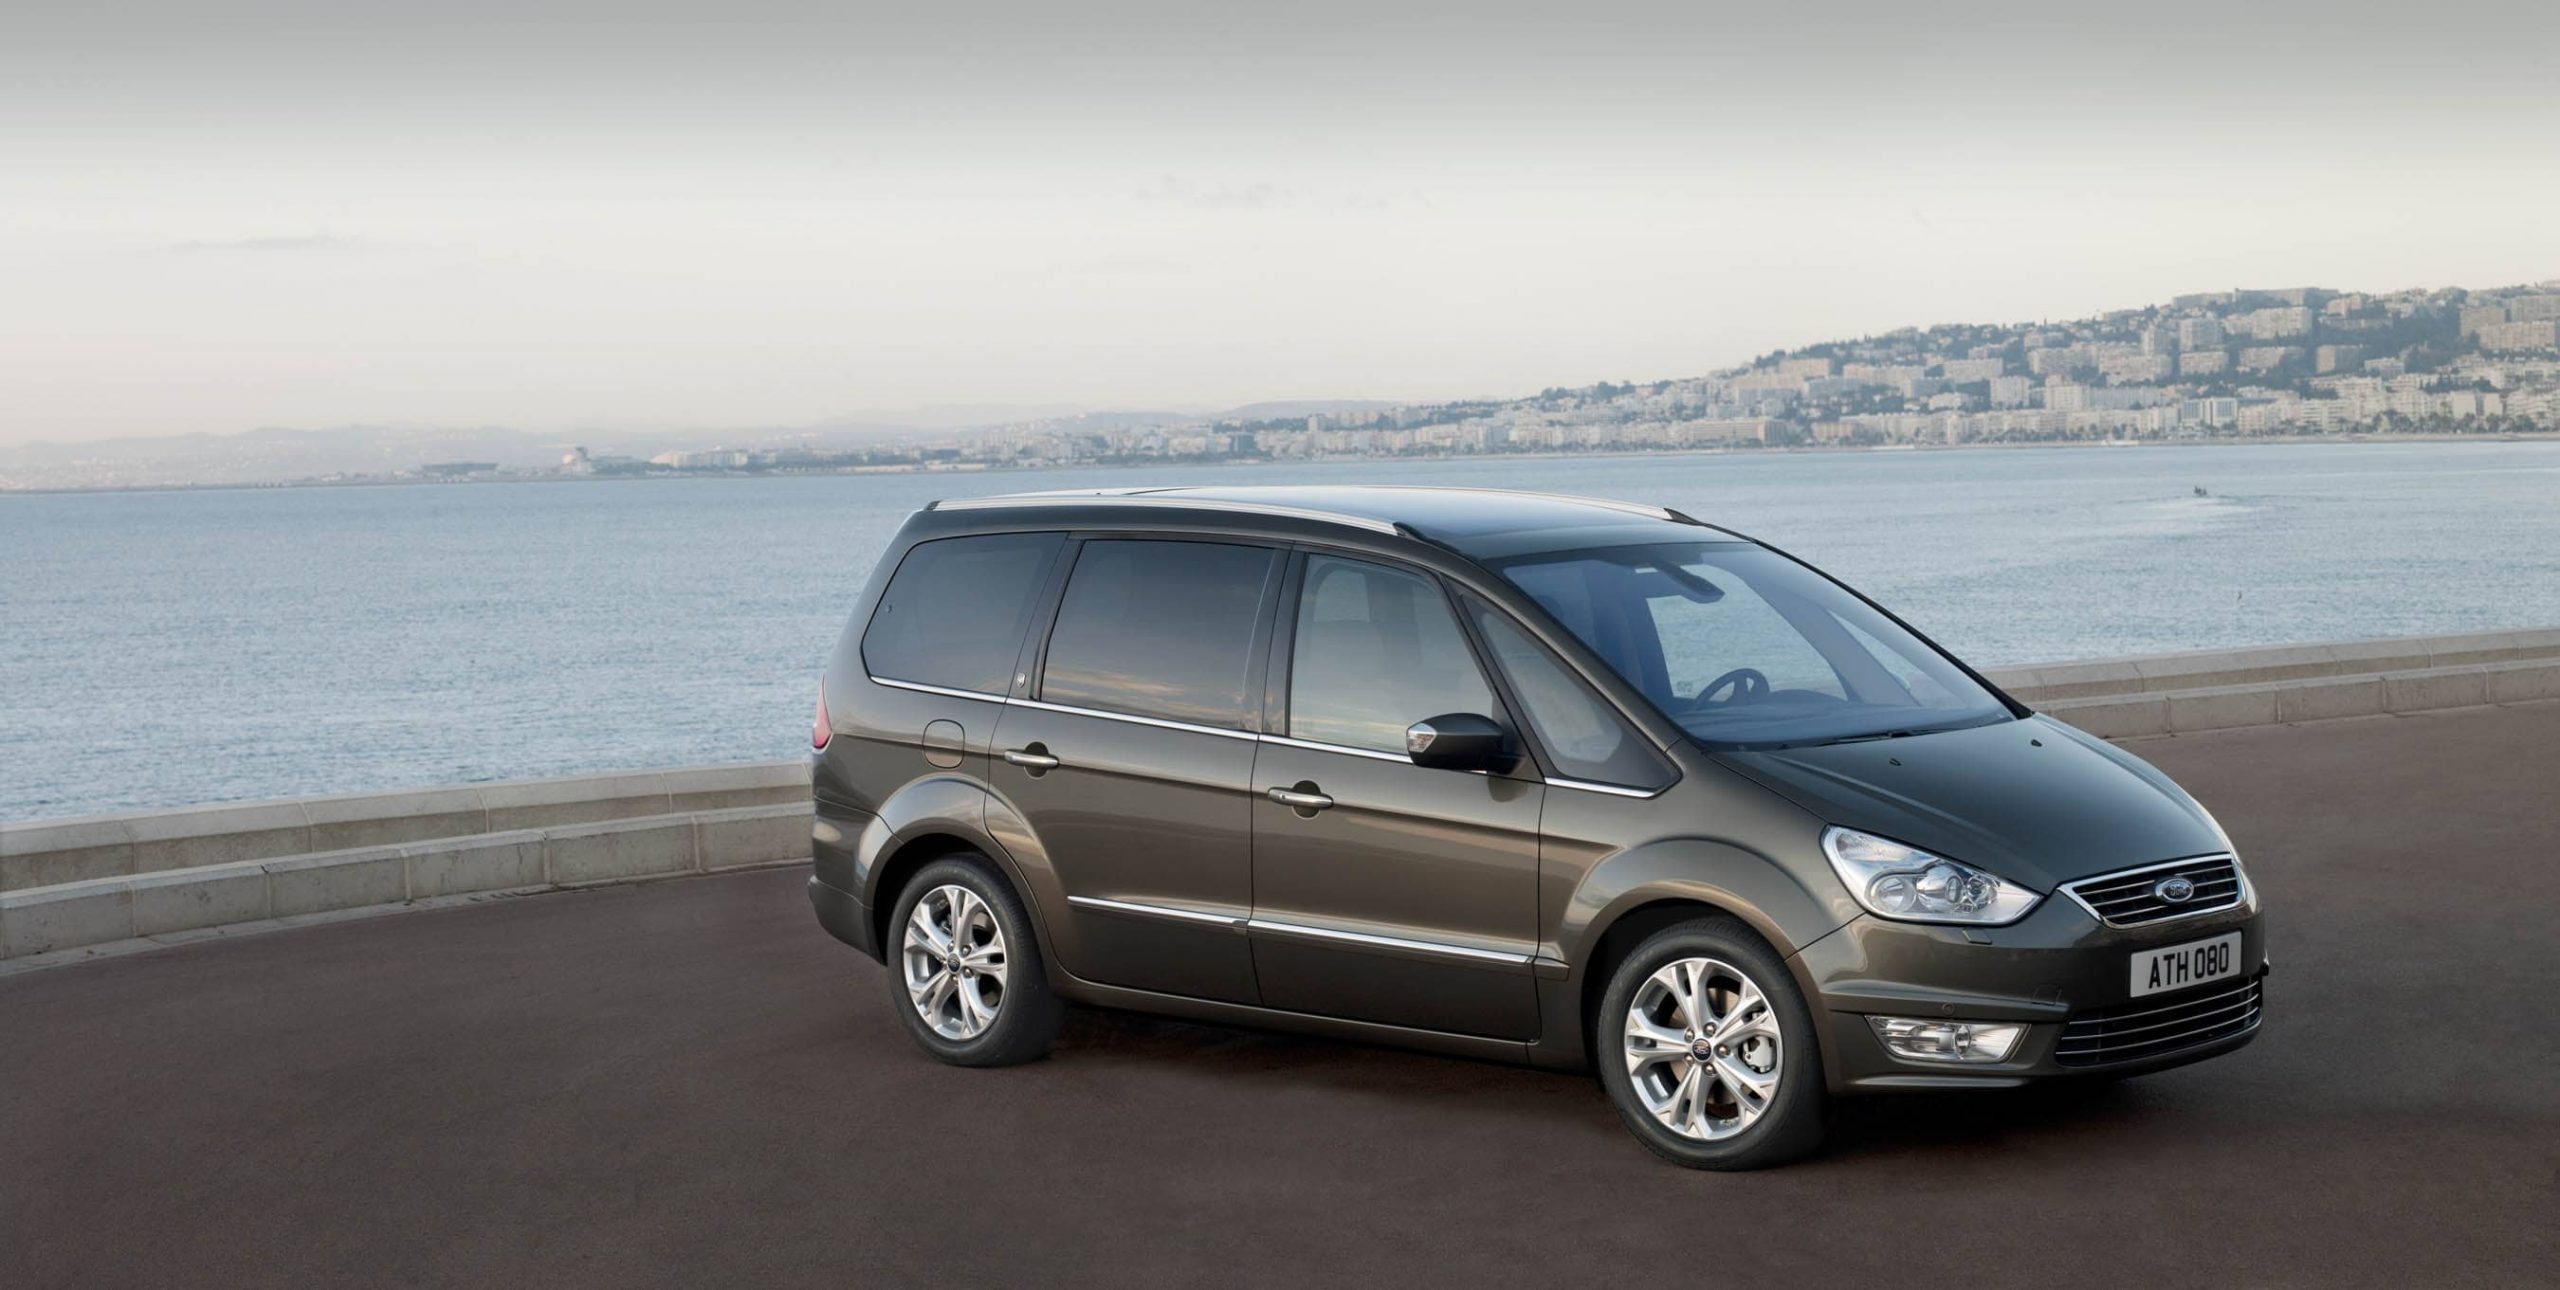 Ford Galaxy describing our 10 best cars for taxi blog